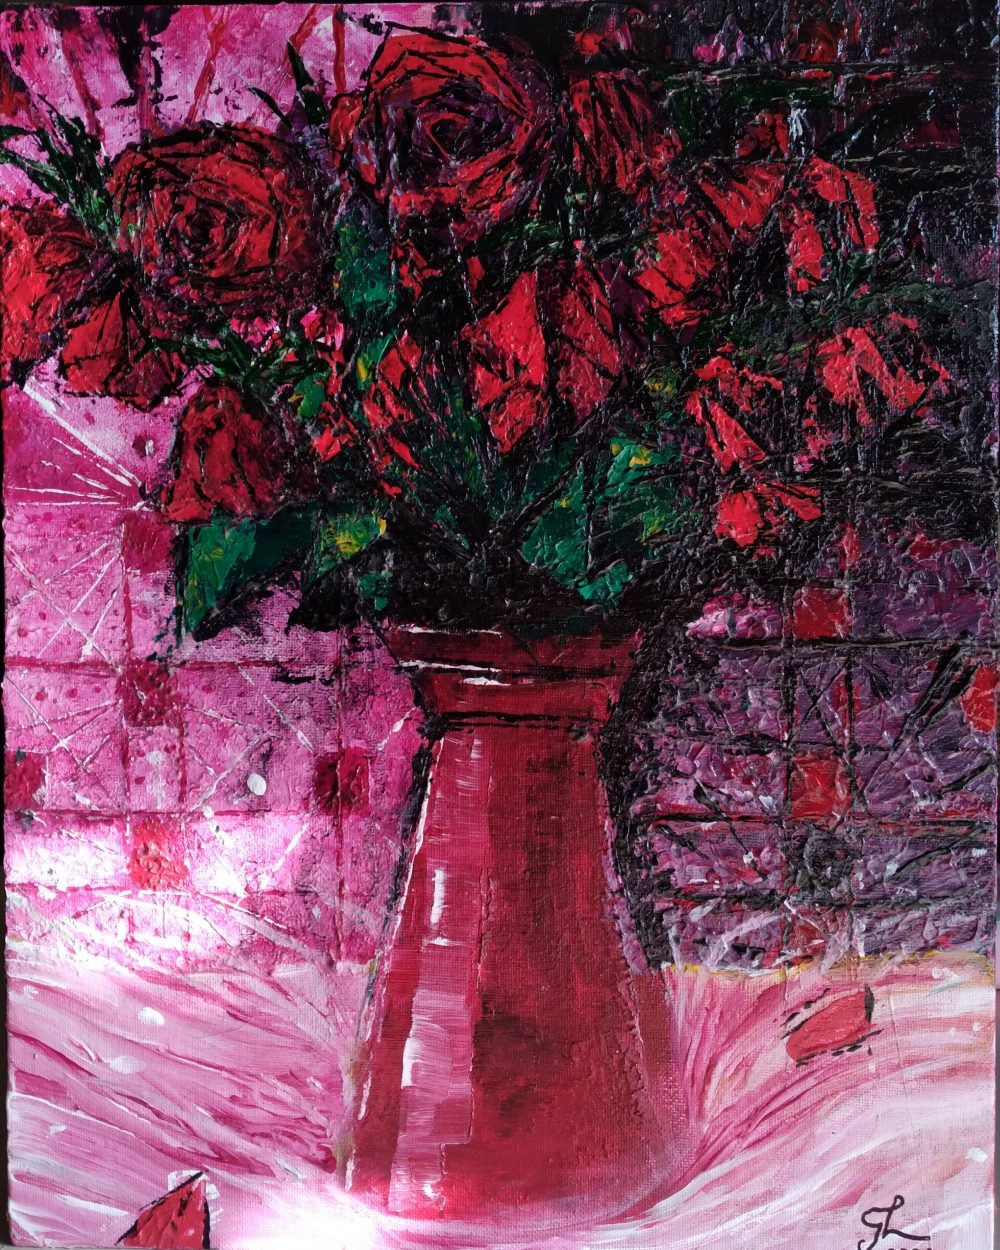 A bouquet of red roses in a red vase, upon a white, pink, and red silky liquid substance that appears to be splashing beneath it. The background appears tiled/grid-like in reds and pinks on the left side, and shaded in dark blacks and purples on the right side.